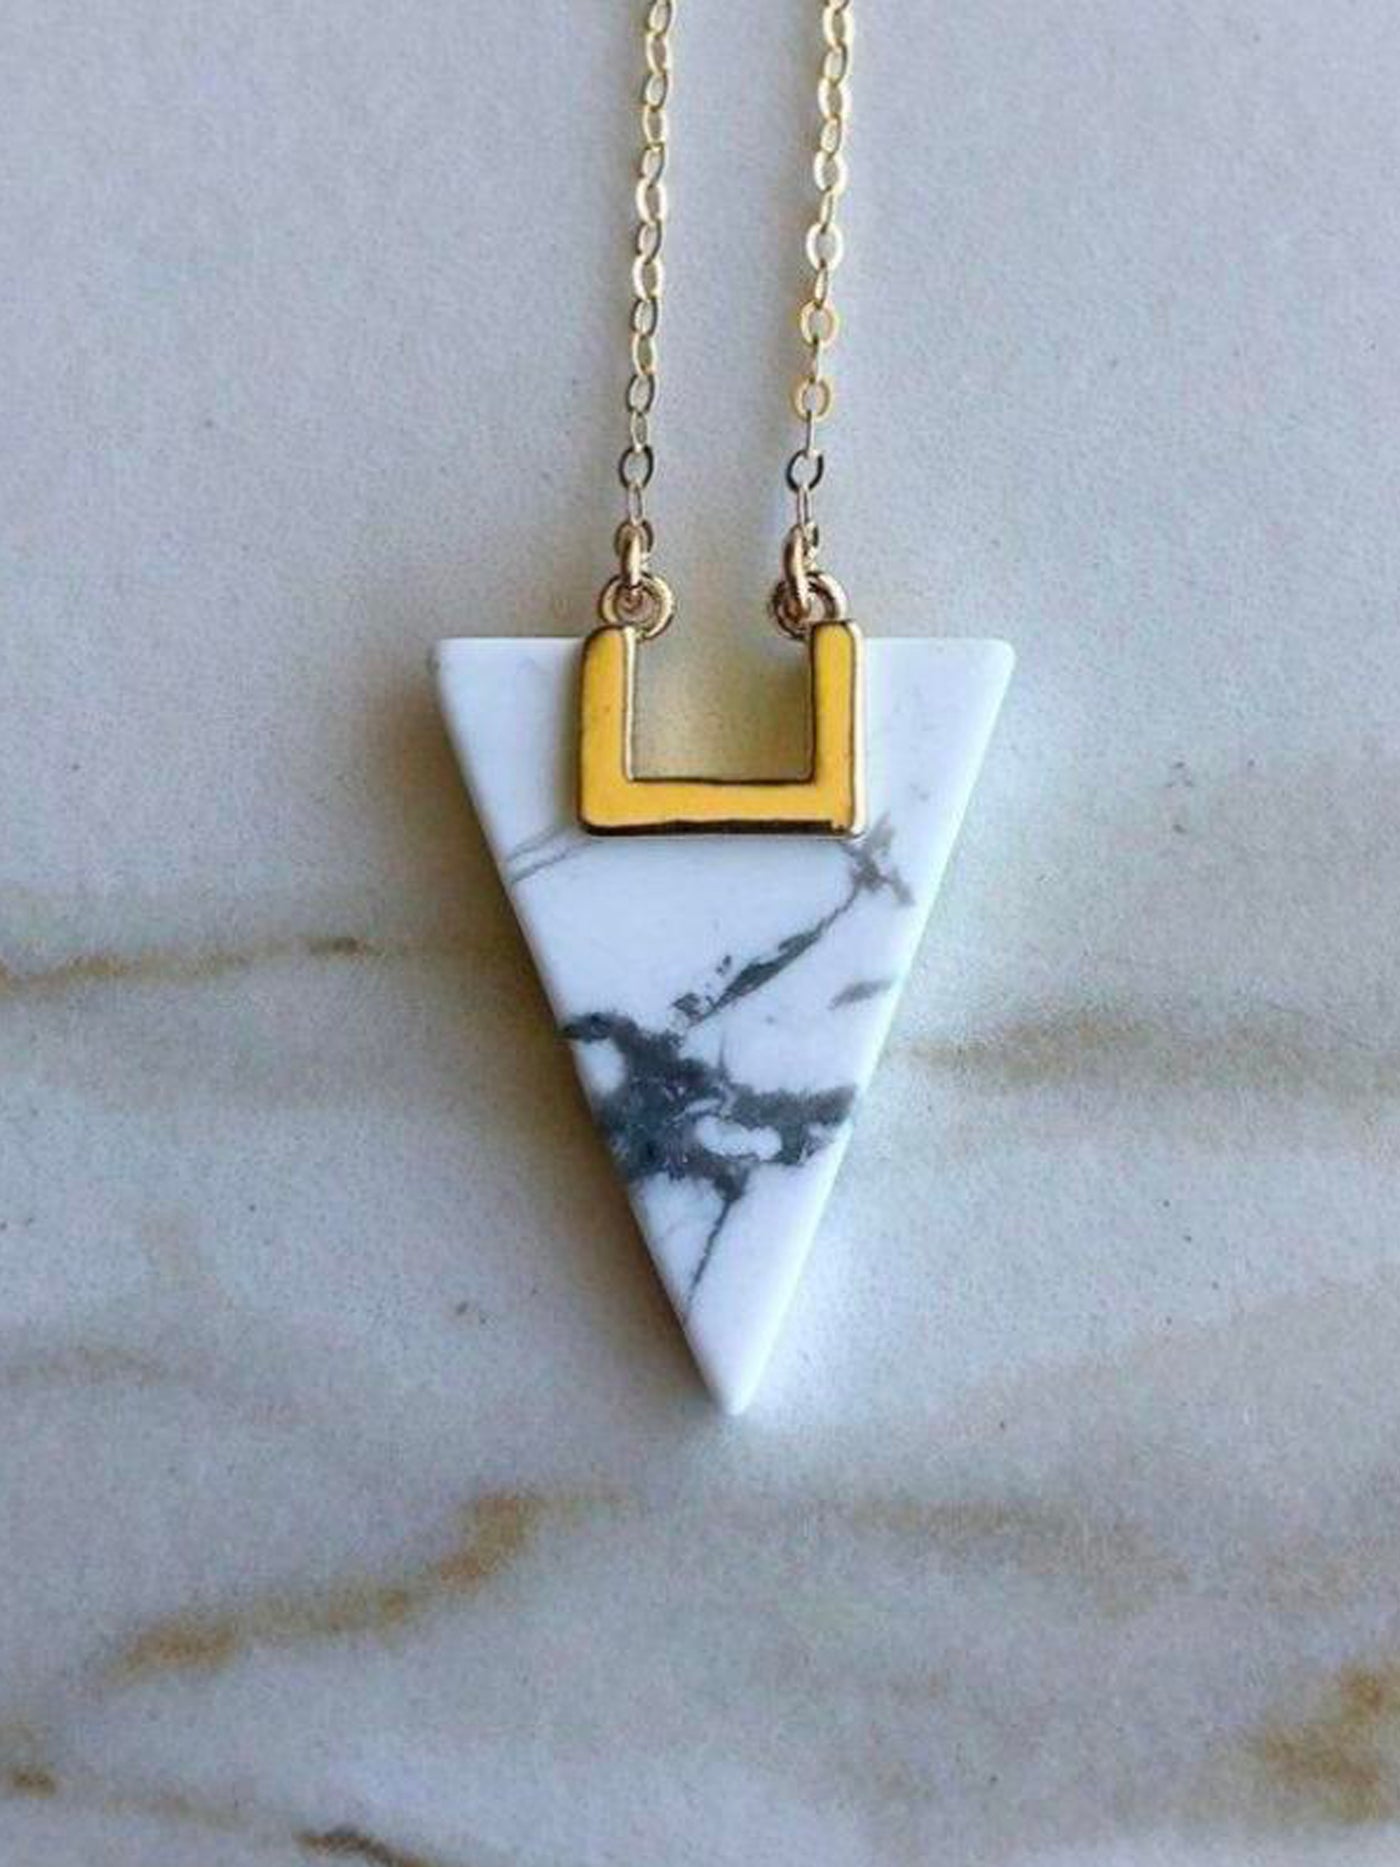 HOWLITE TRIANGLE GEOMETRIC NECKLACE. Howlite triangle geometric stone hangs delicately from a 14K gold filled 18" chain.